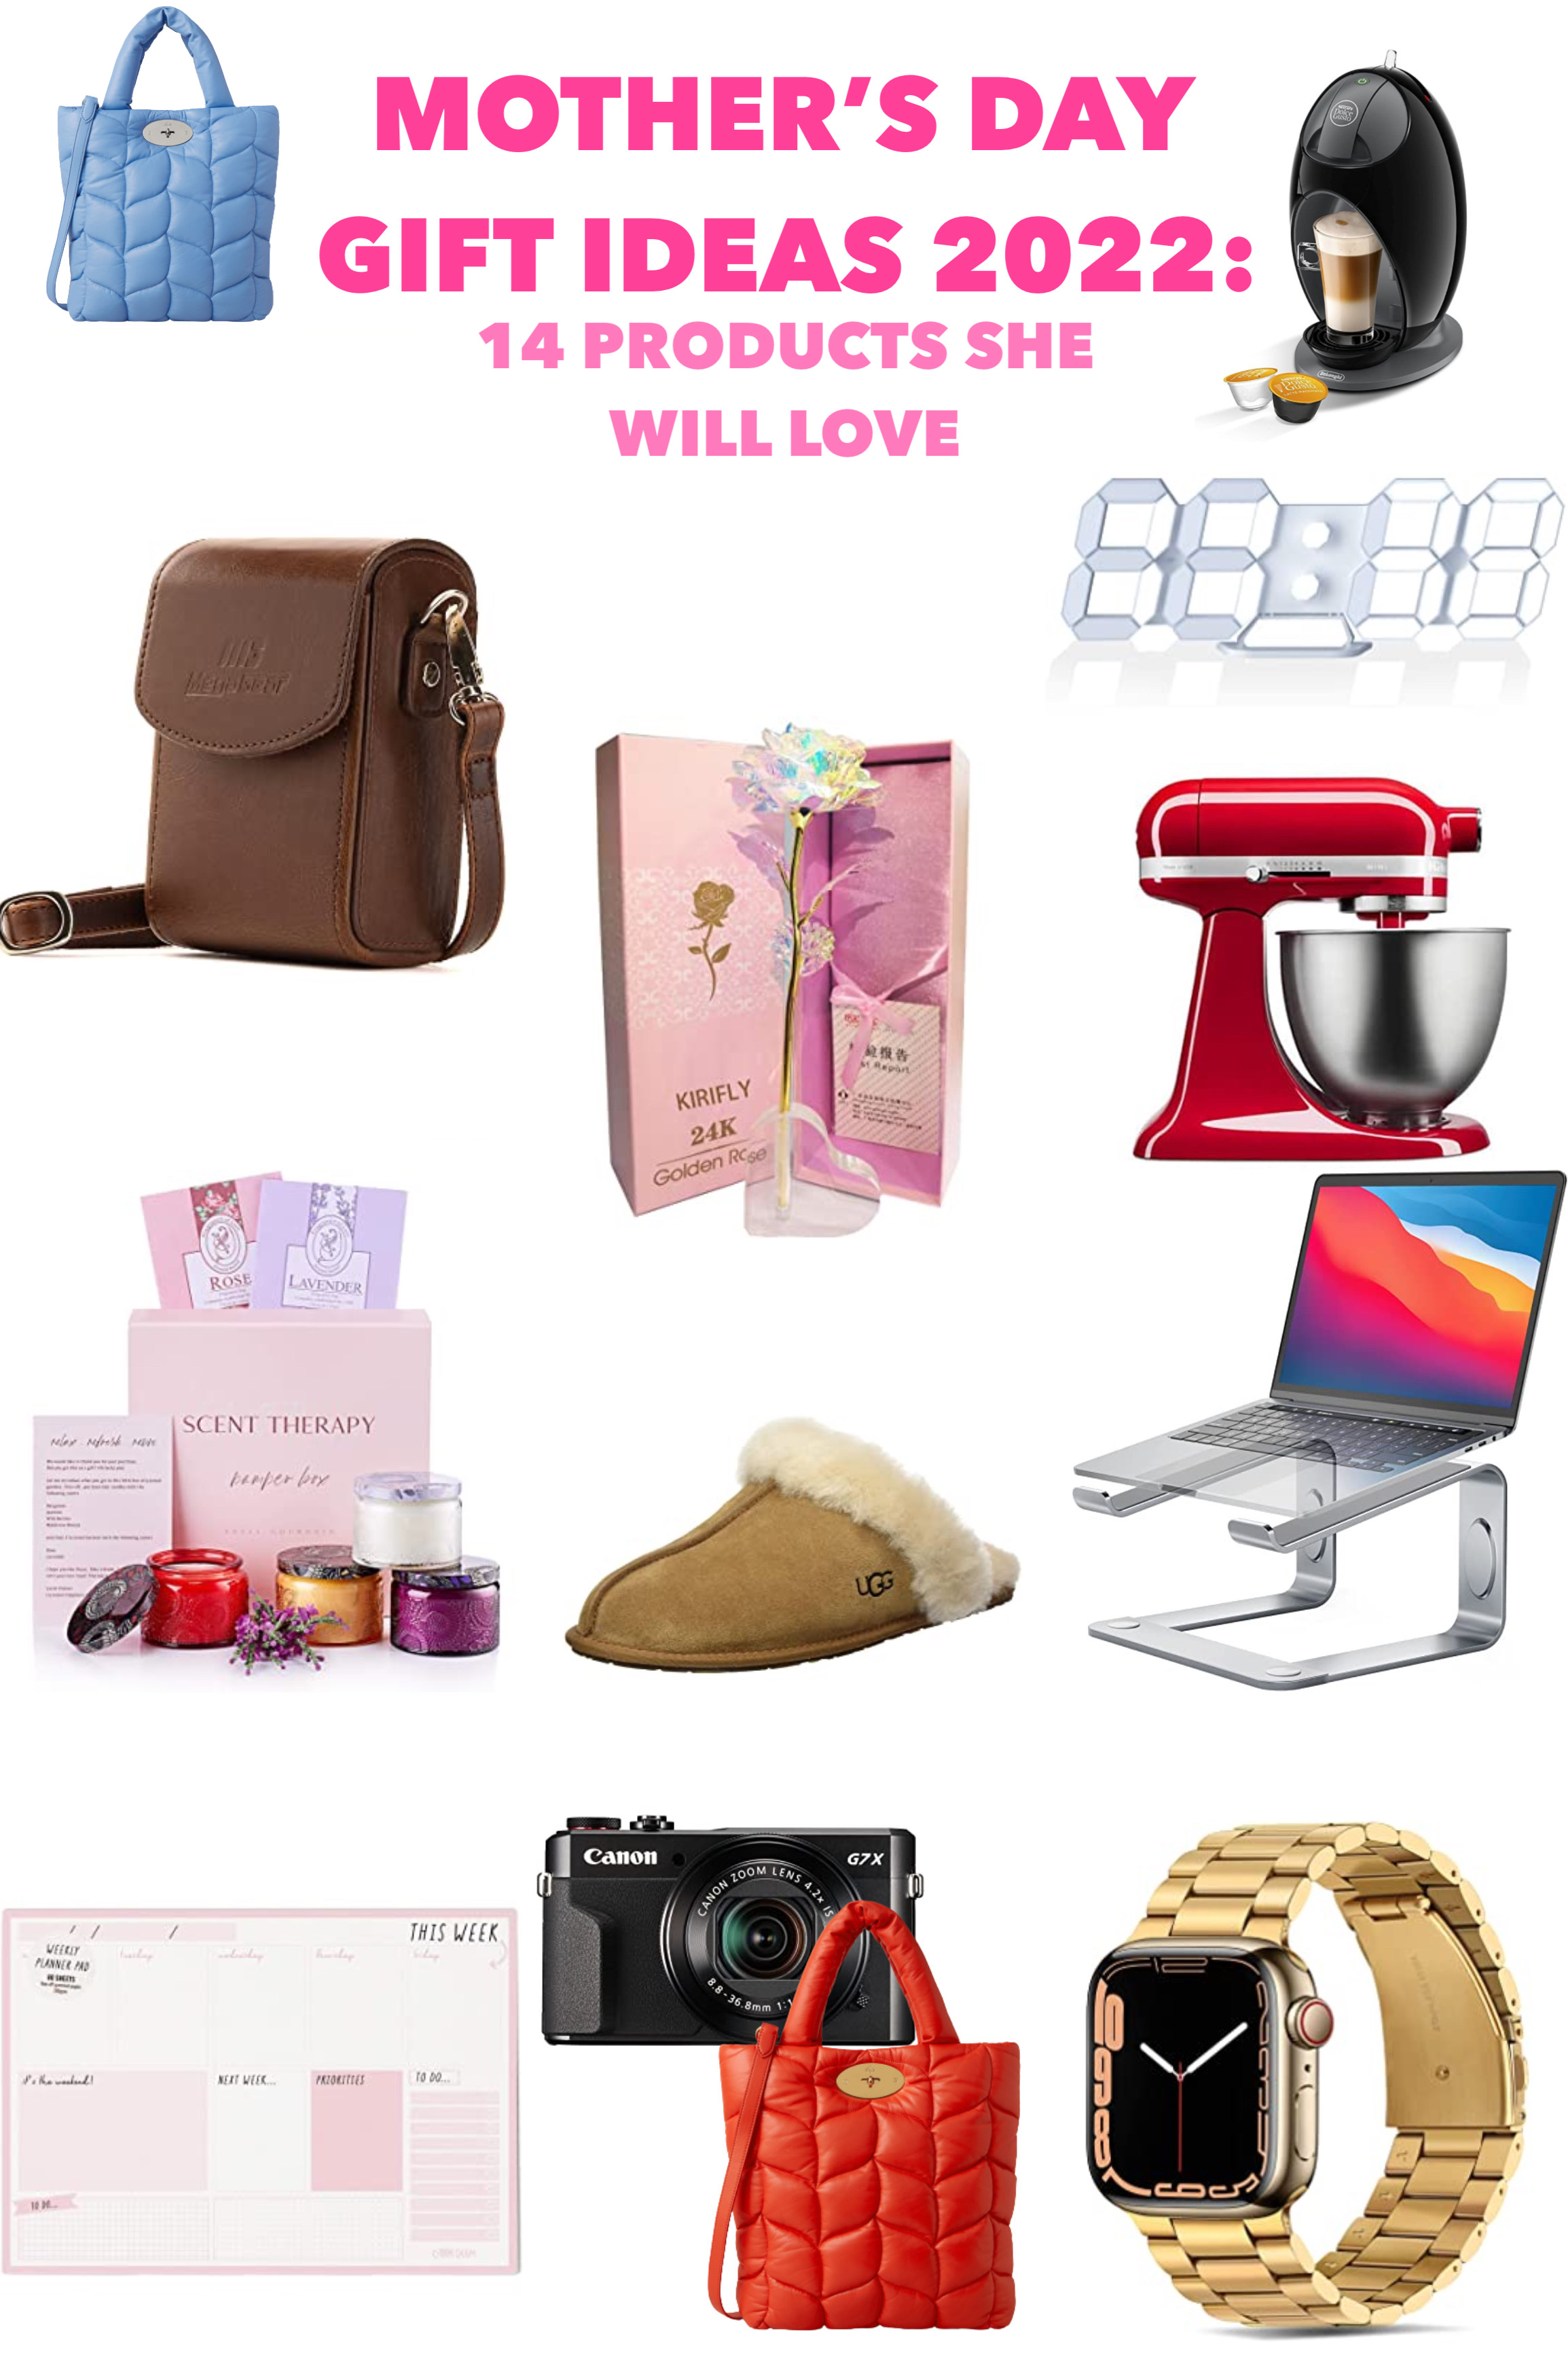 Mother’s Day Gift Ideas 2022: 14 Products She Will Love